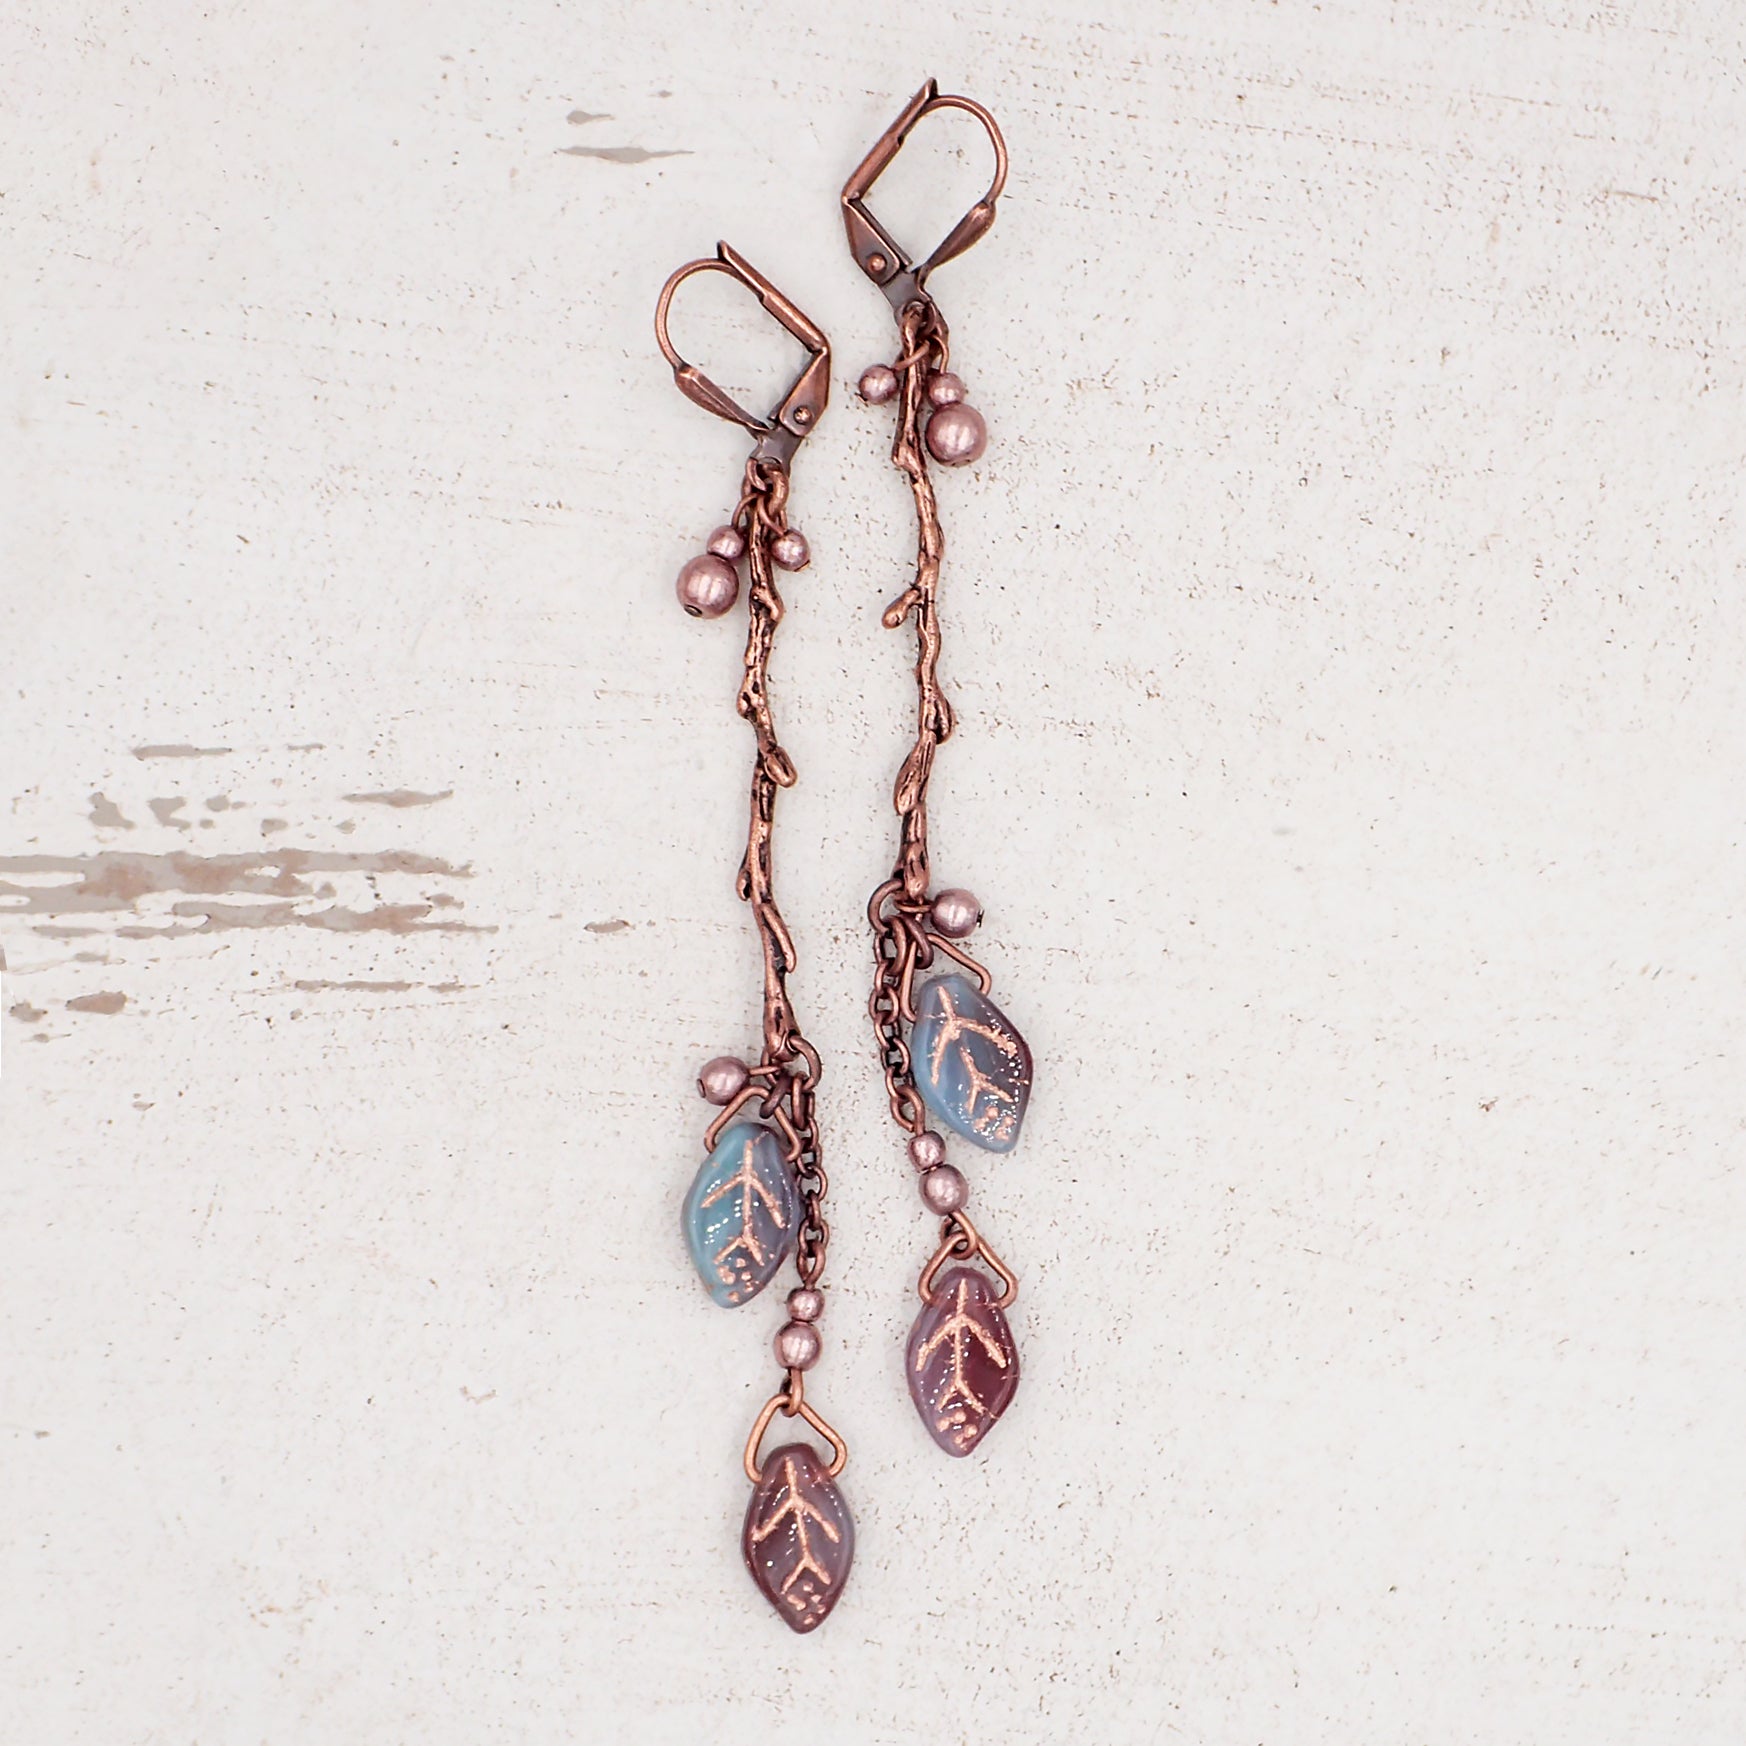 Handmade Boho Branch Earrings with Aqua and Purple Artisan Czech Glass Leaf Beads and Antiqued Copper